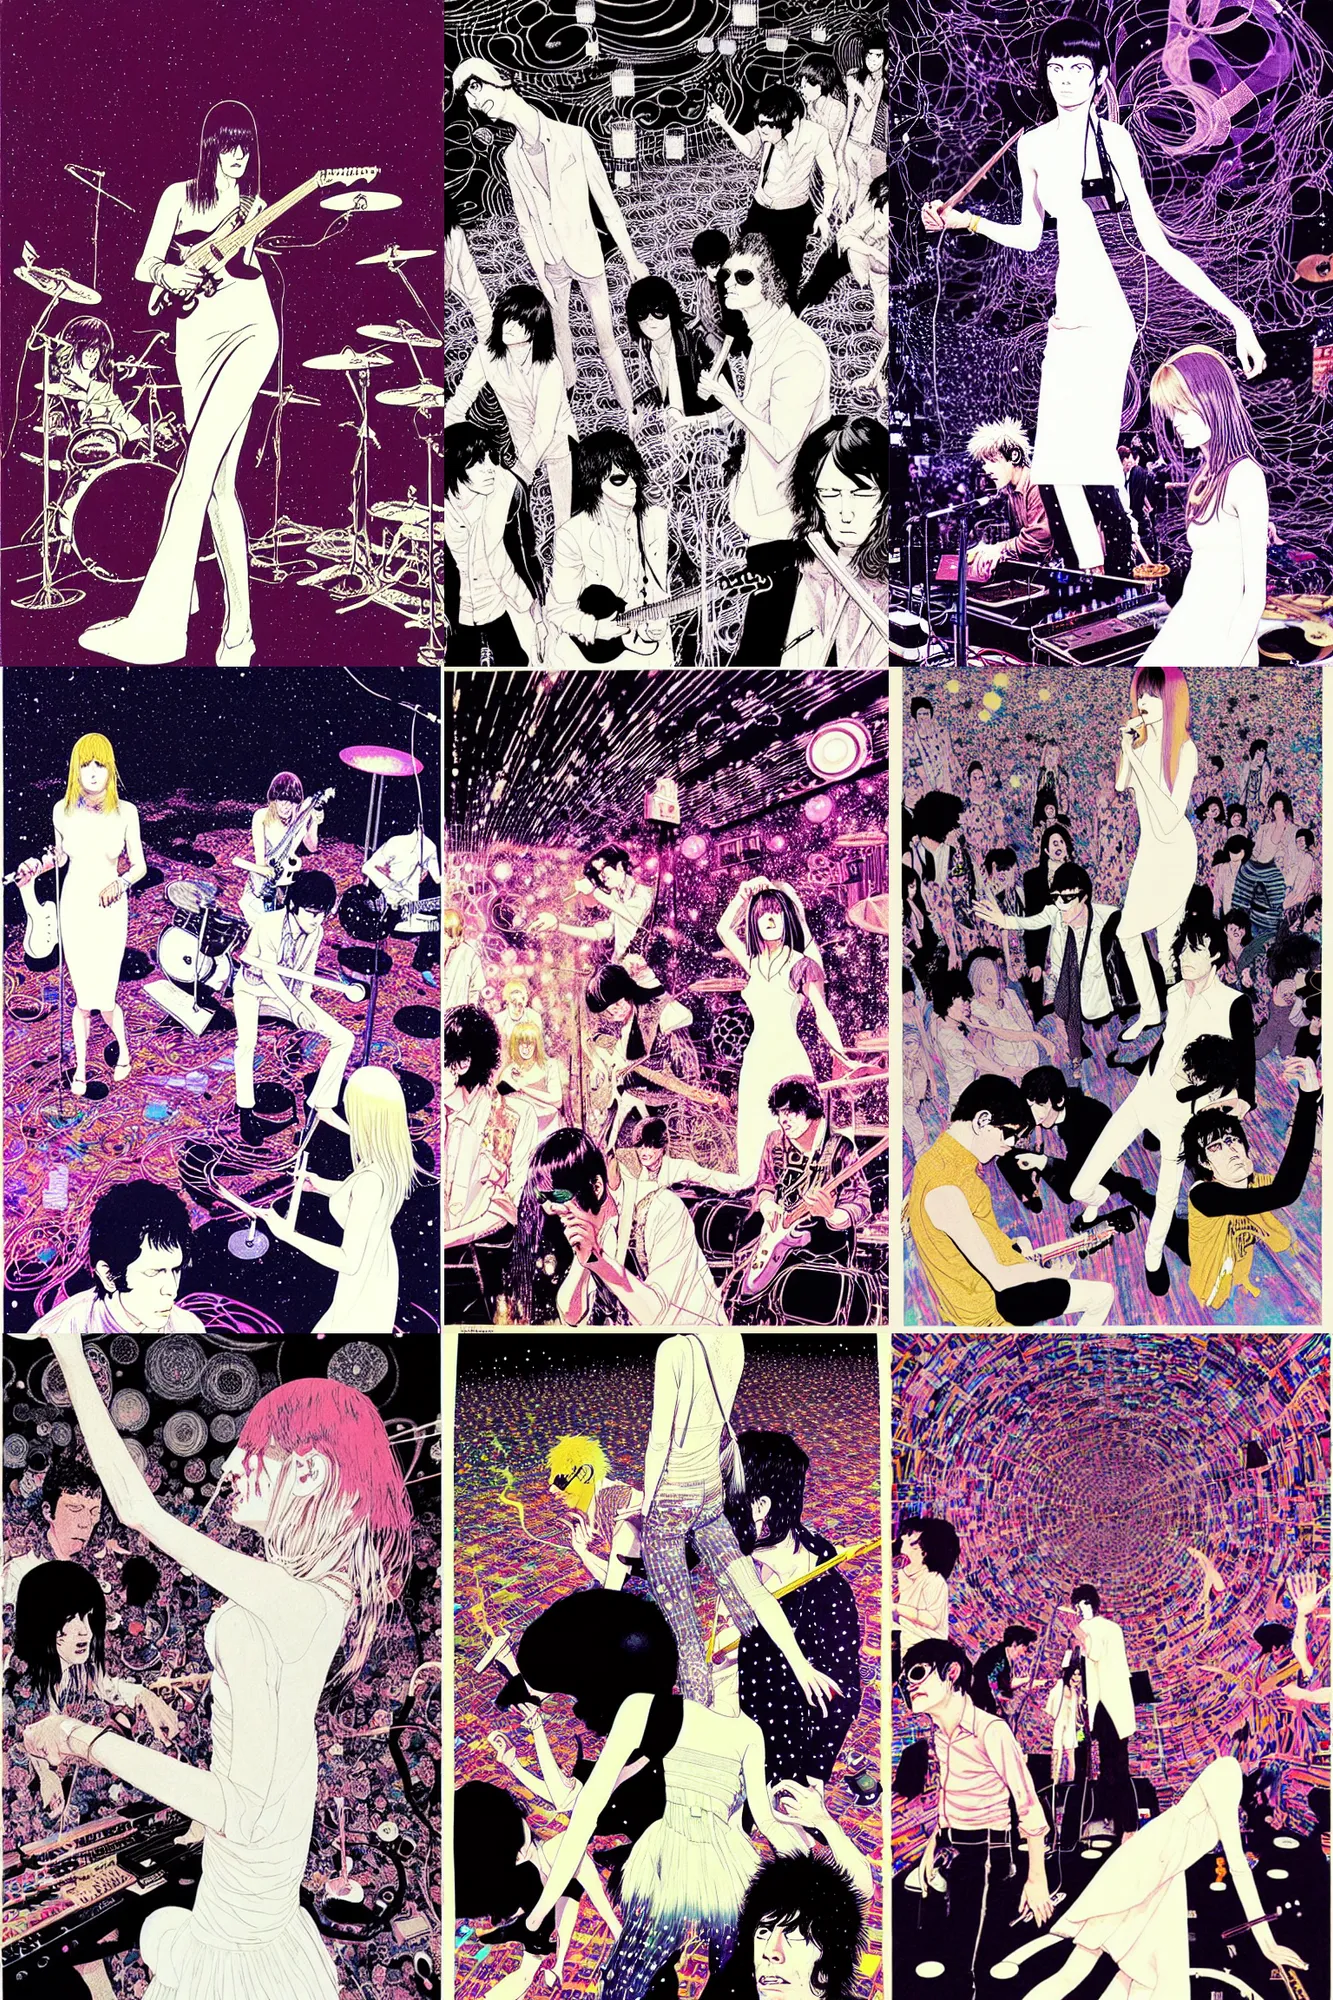 Prompt: the velvet underground playing in a night club in 1 9 6 9 live on stage and nico wearing a white dress, art by katsuhiro otomo, victo ngai, james gurney, james jean, very detailed and colorful